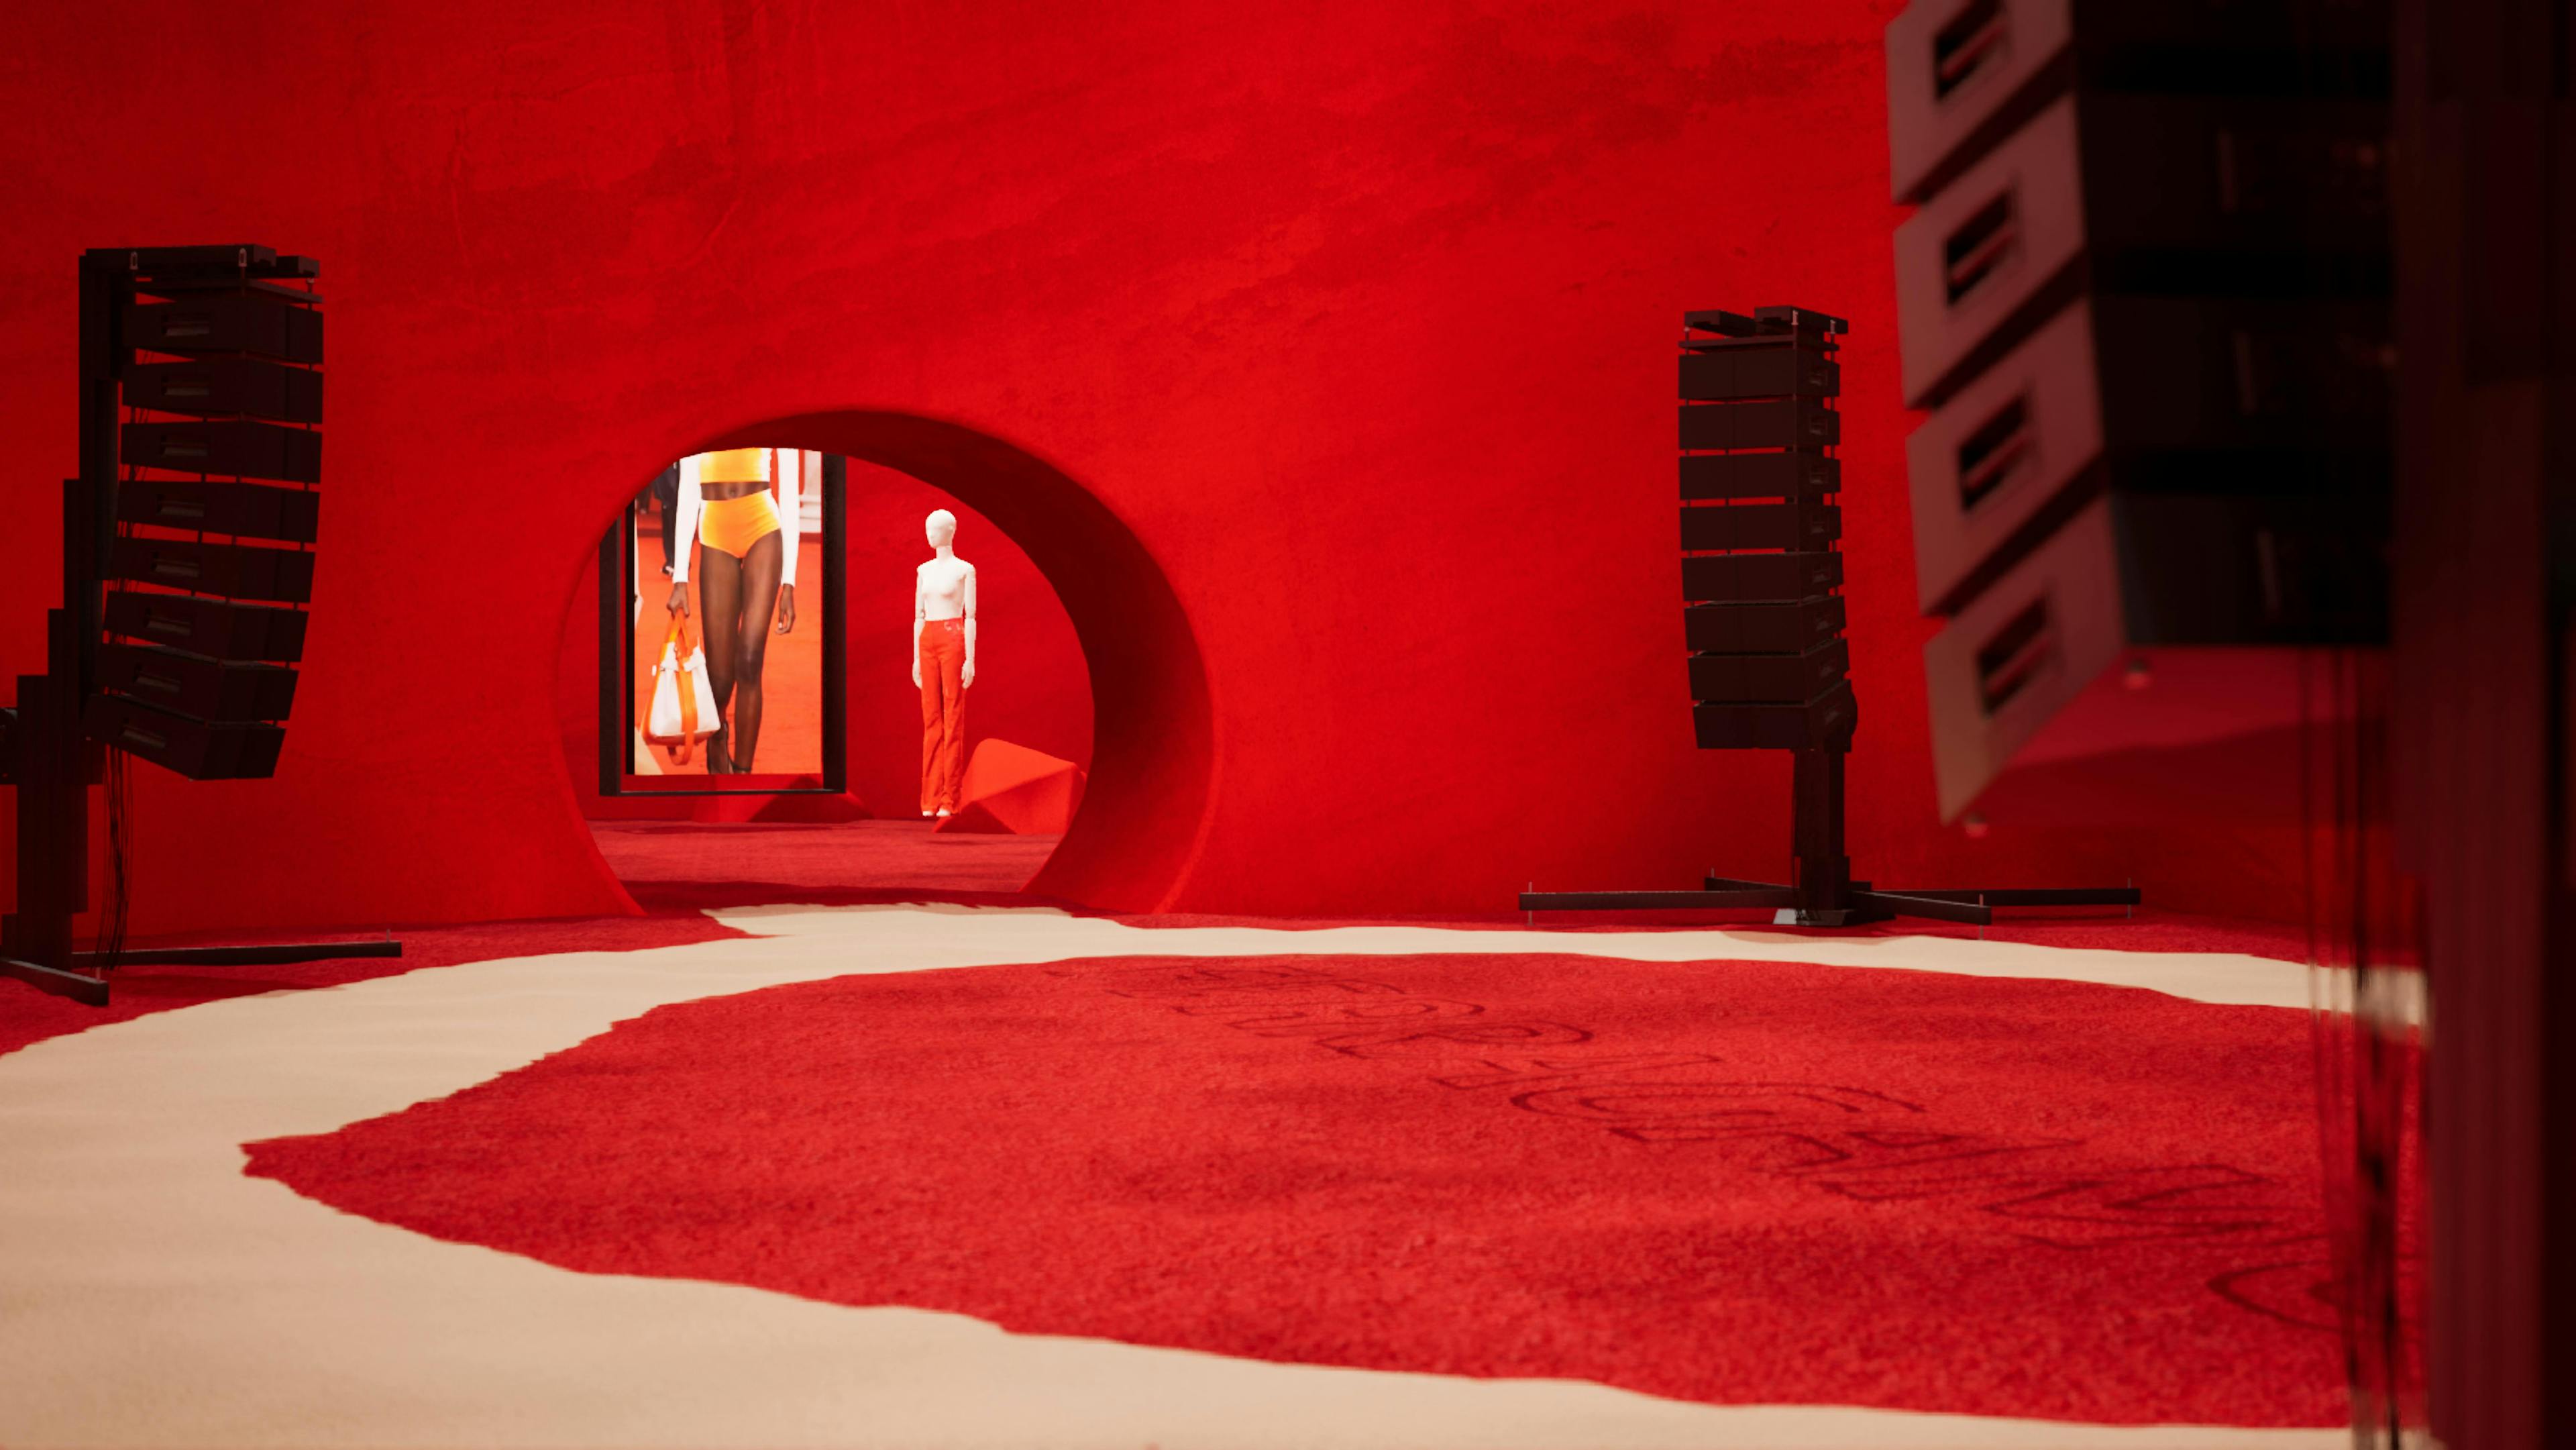 A runway with white marble, red carpet, and manequin in red pants in a red room